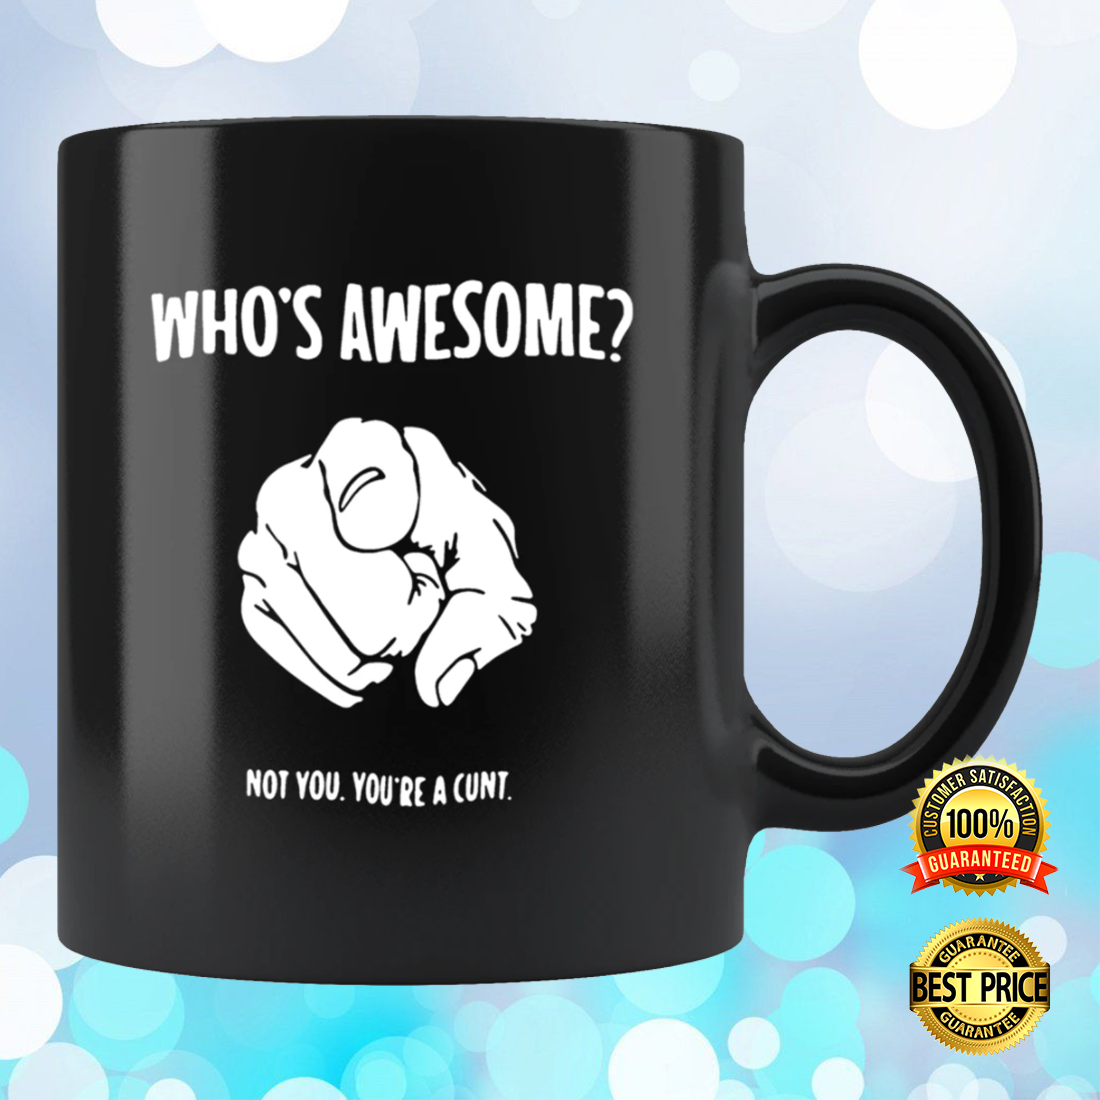 Who s awesome not you you re a cunt mug 2